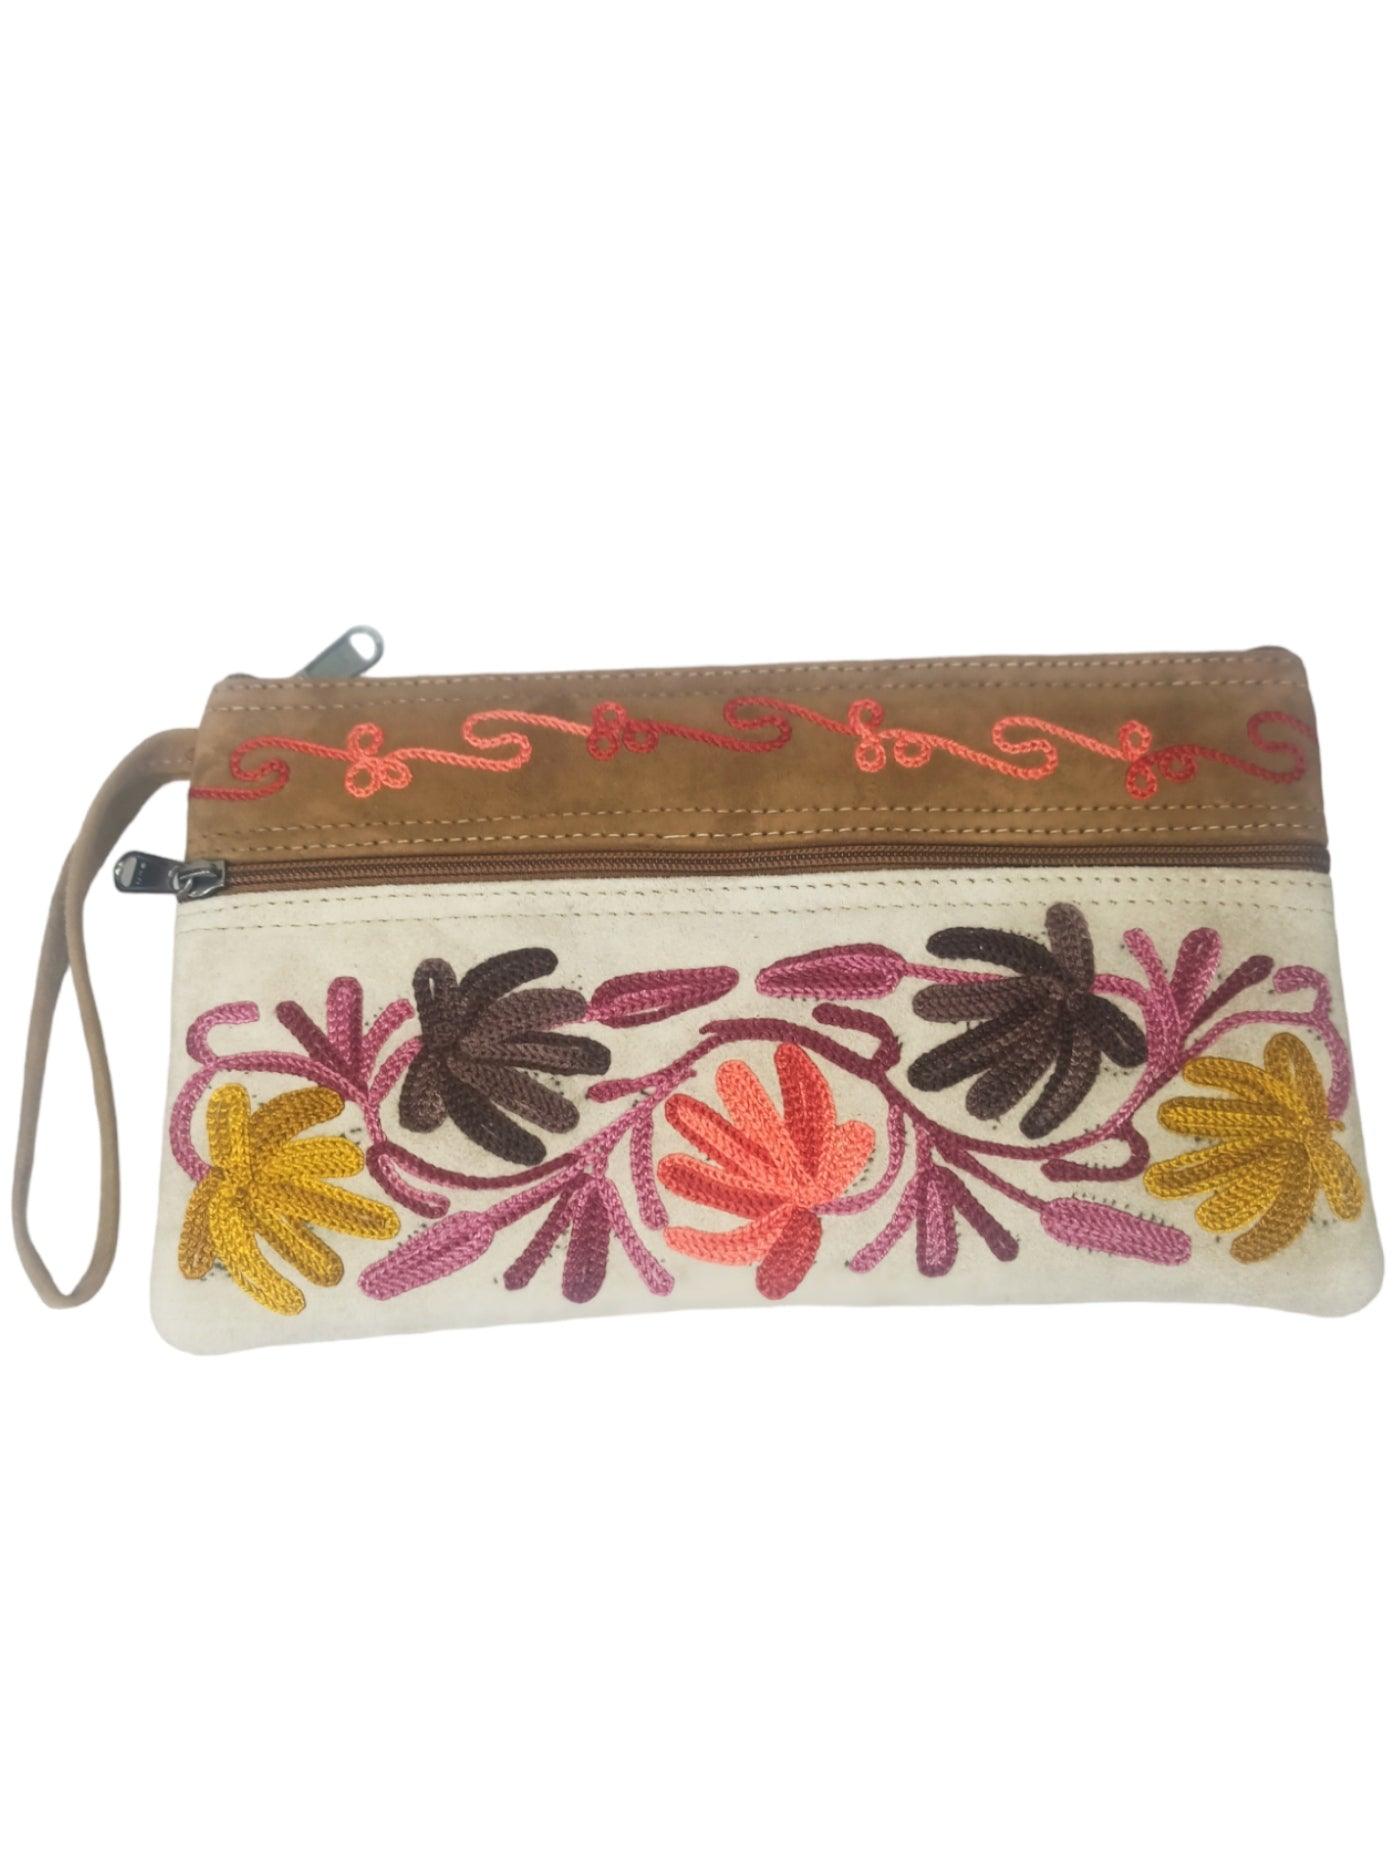 Suede Leather Purse | Aari Hand Purch | 8" 3 Zip Embroidered Purse